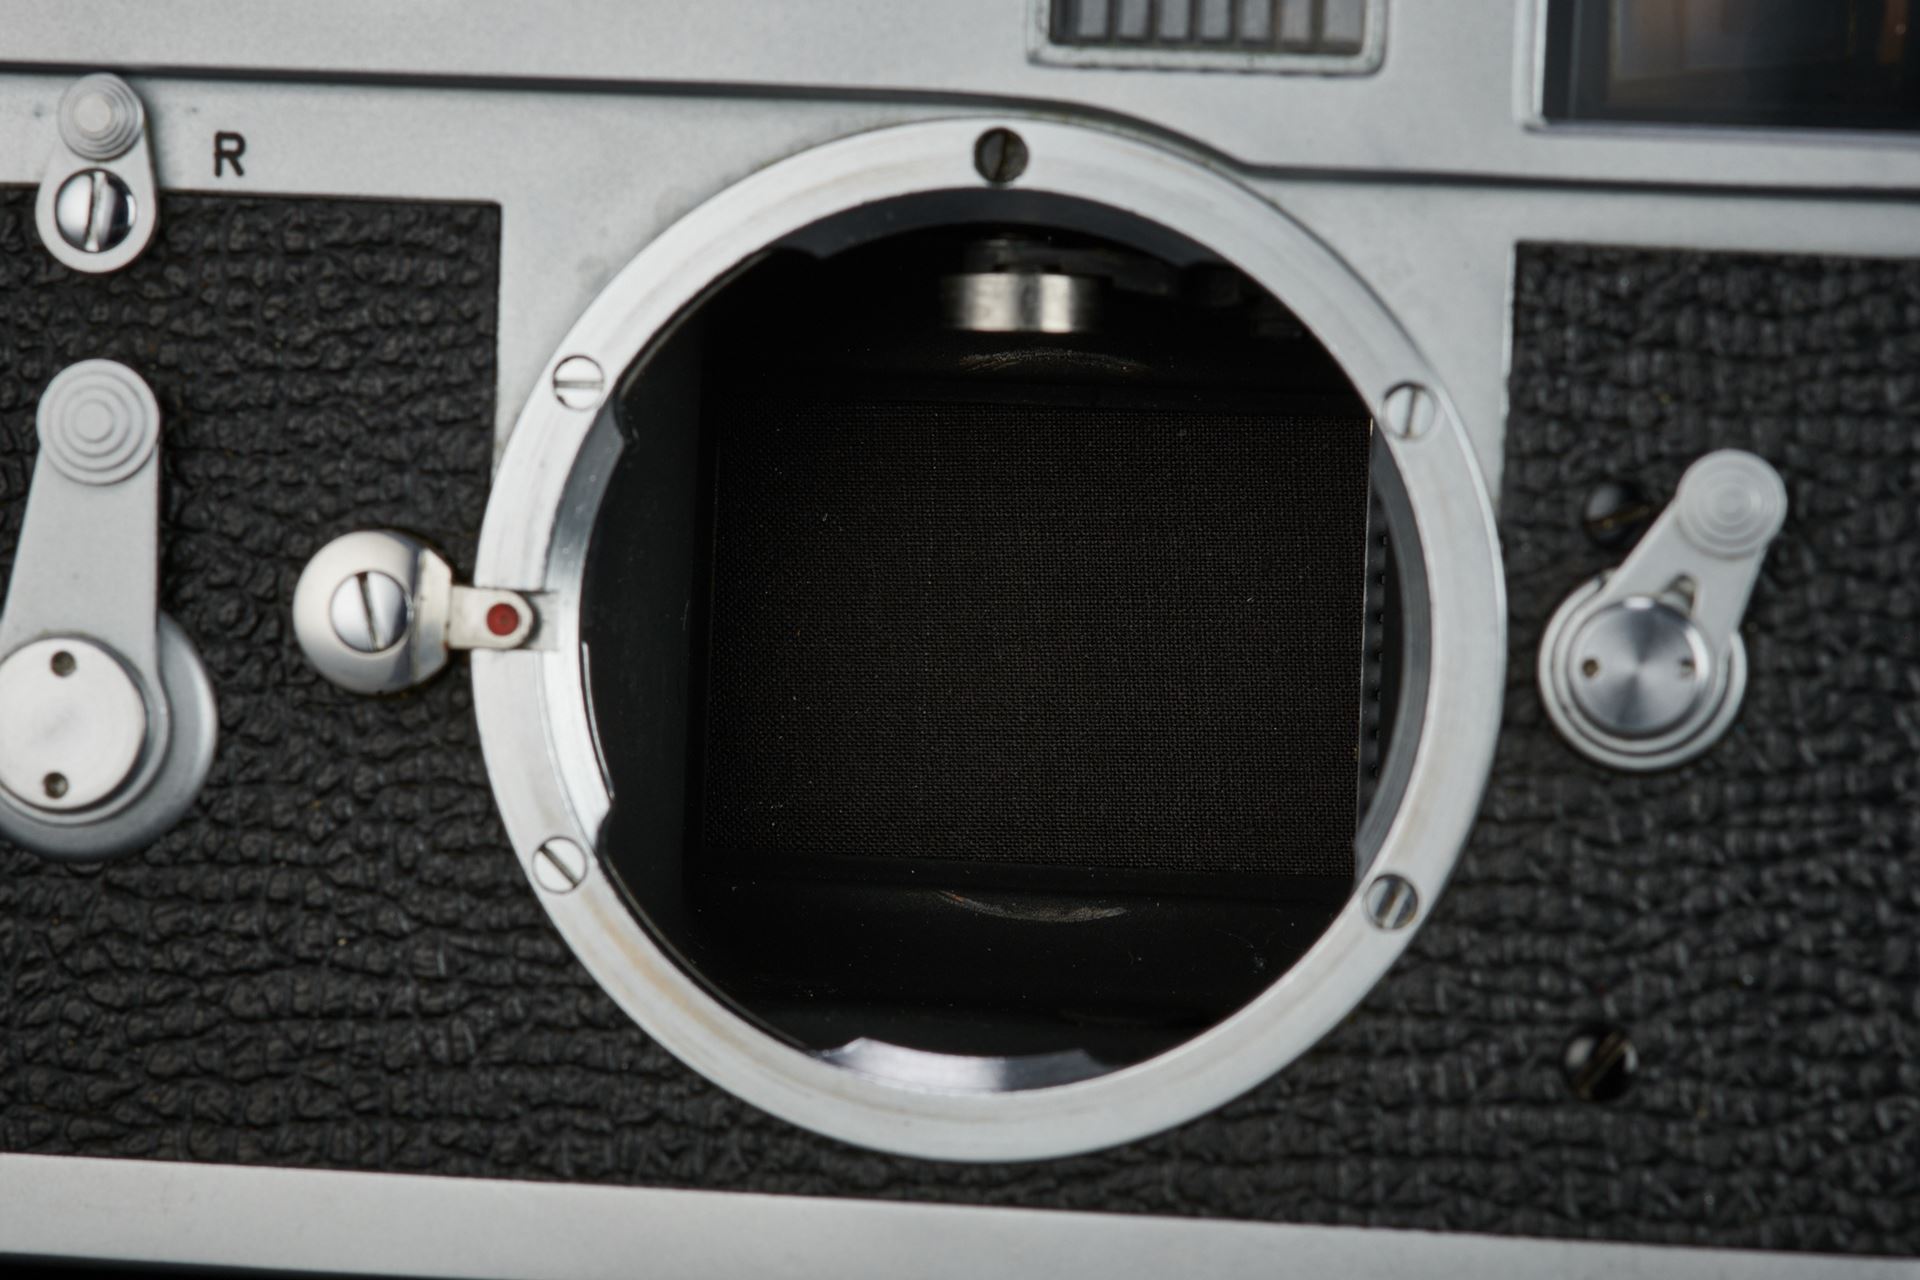 Picture of Leica M2 Silver